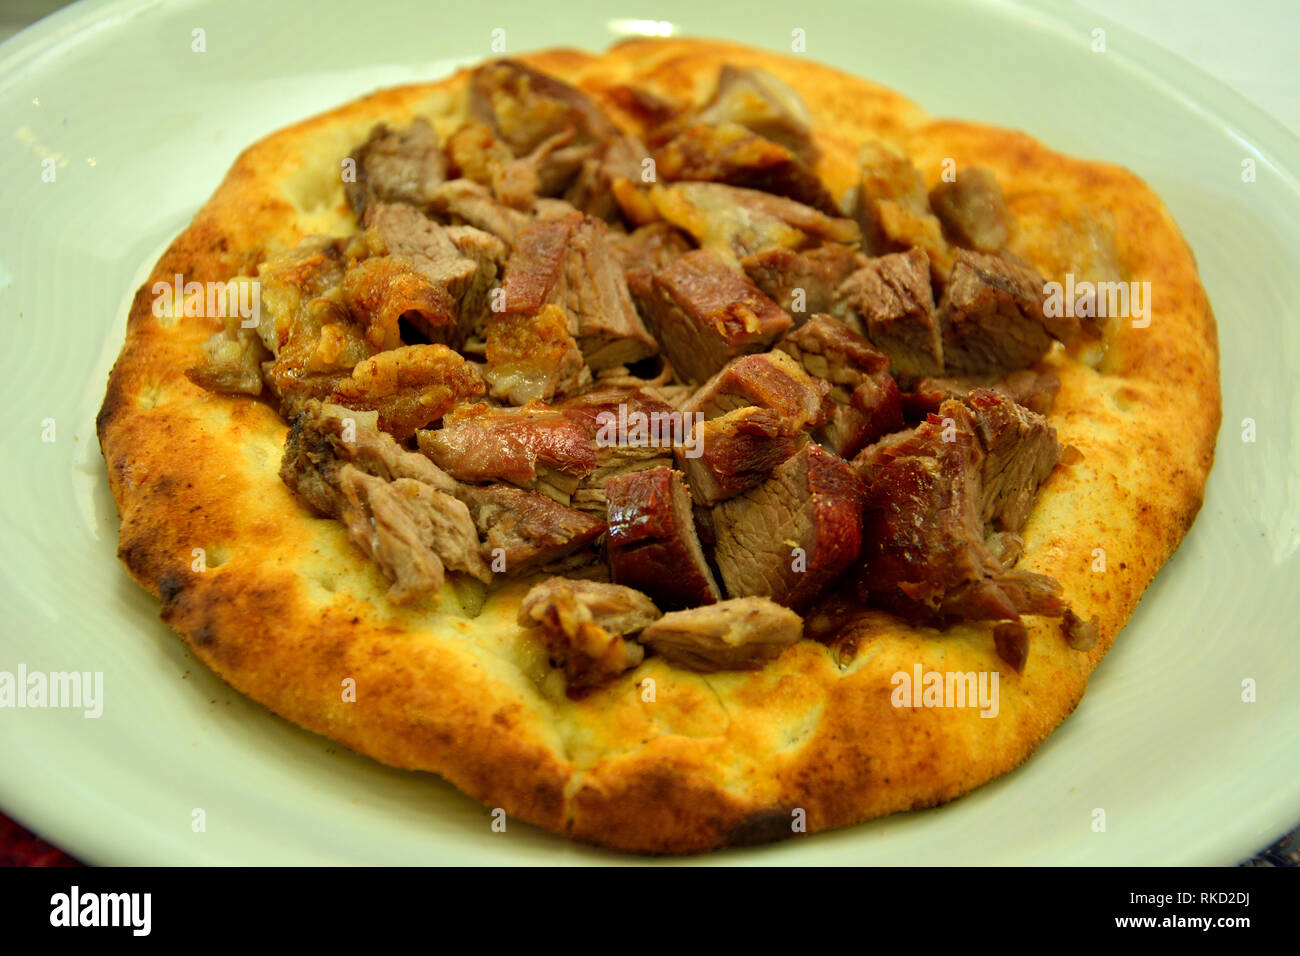 Buryan (lamb slow-cooked in a pit) served on a flat bread in Turkey. Stock Photo